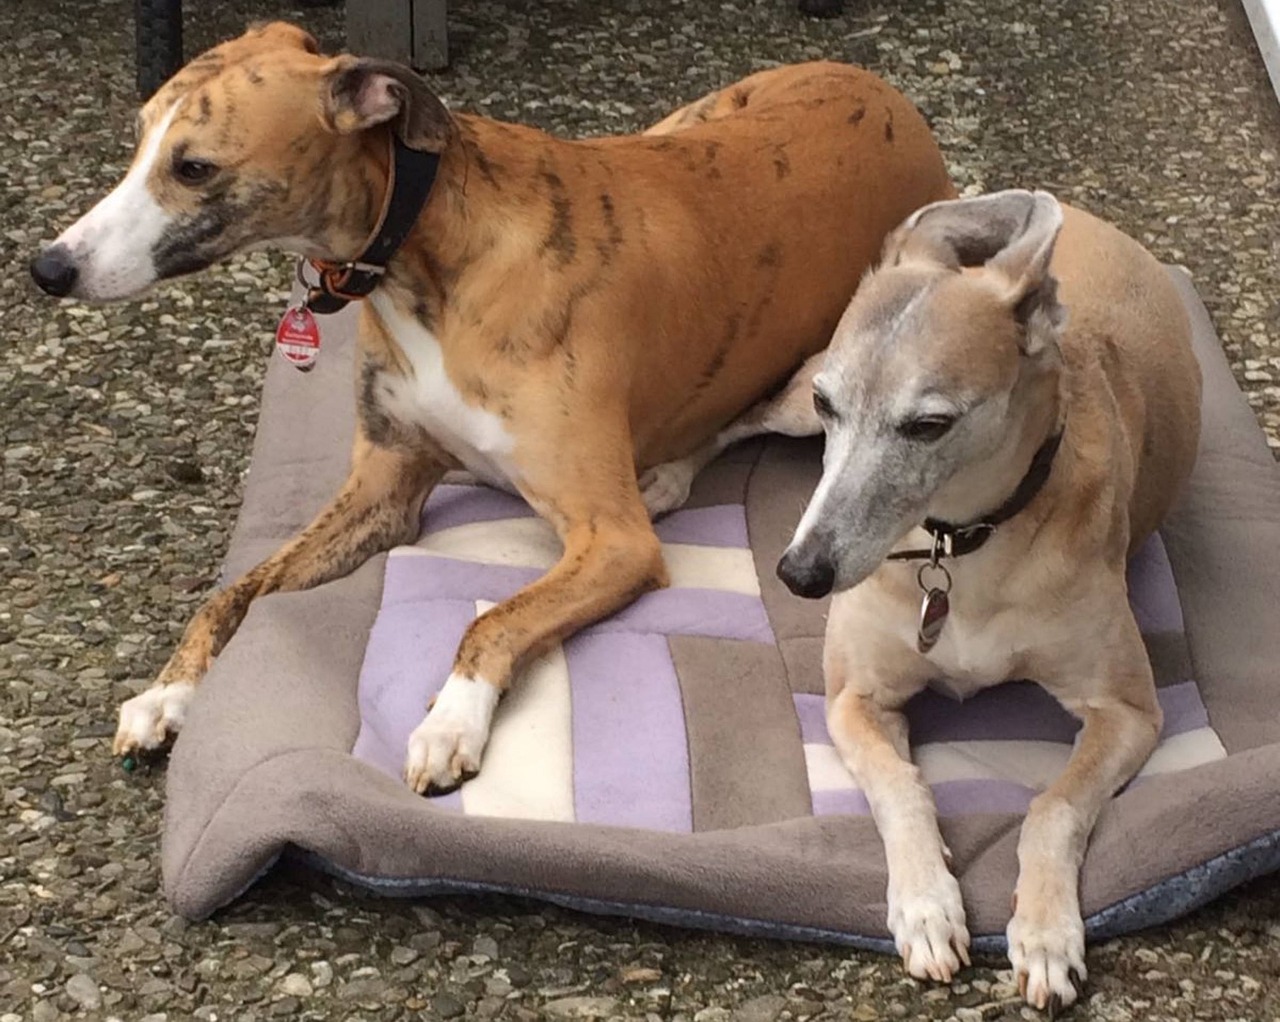 10 Hilarious Things Only a Whippet Owner Would Understand